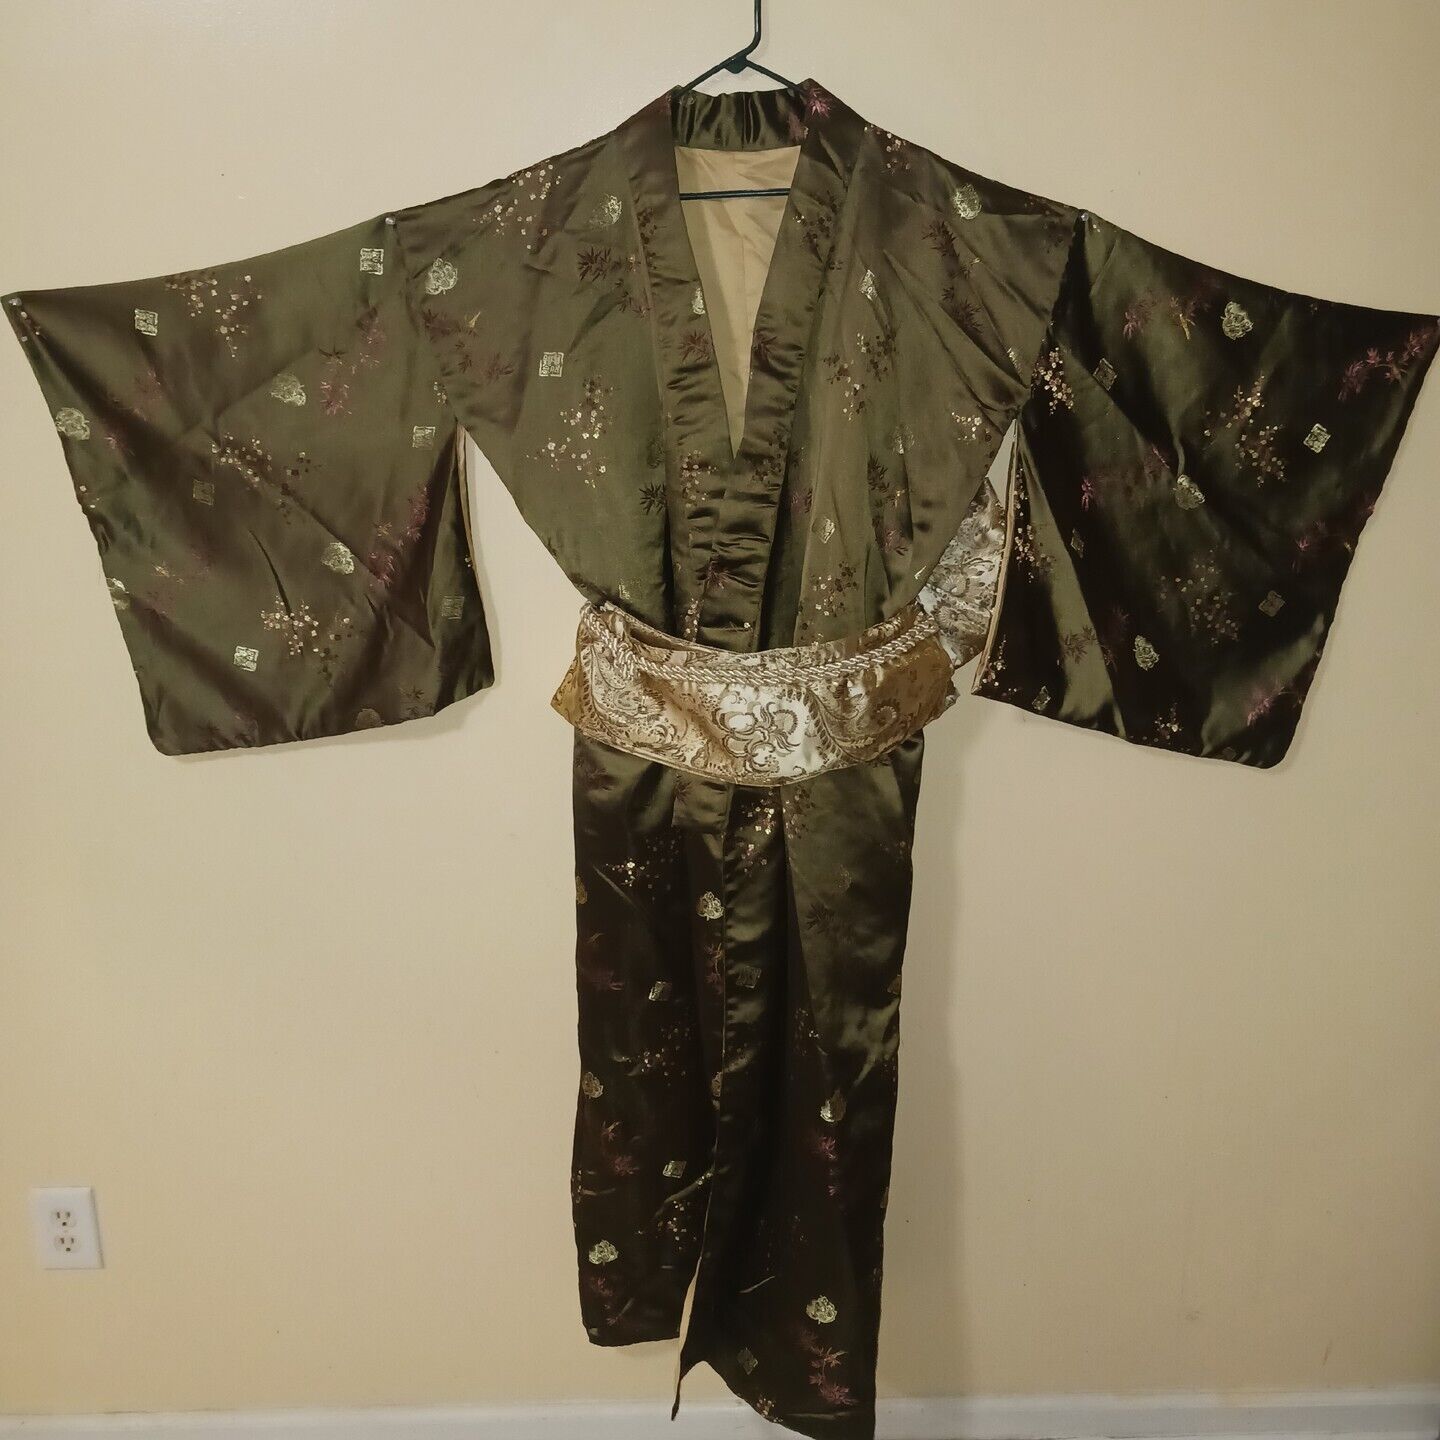 Women's Green and Gold Kimono Ceremonial Traditional Excellent Cond